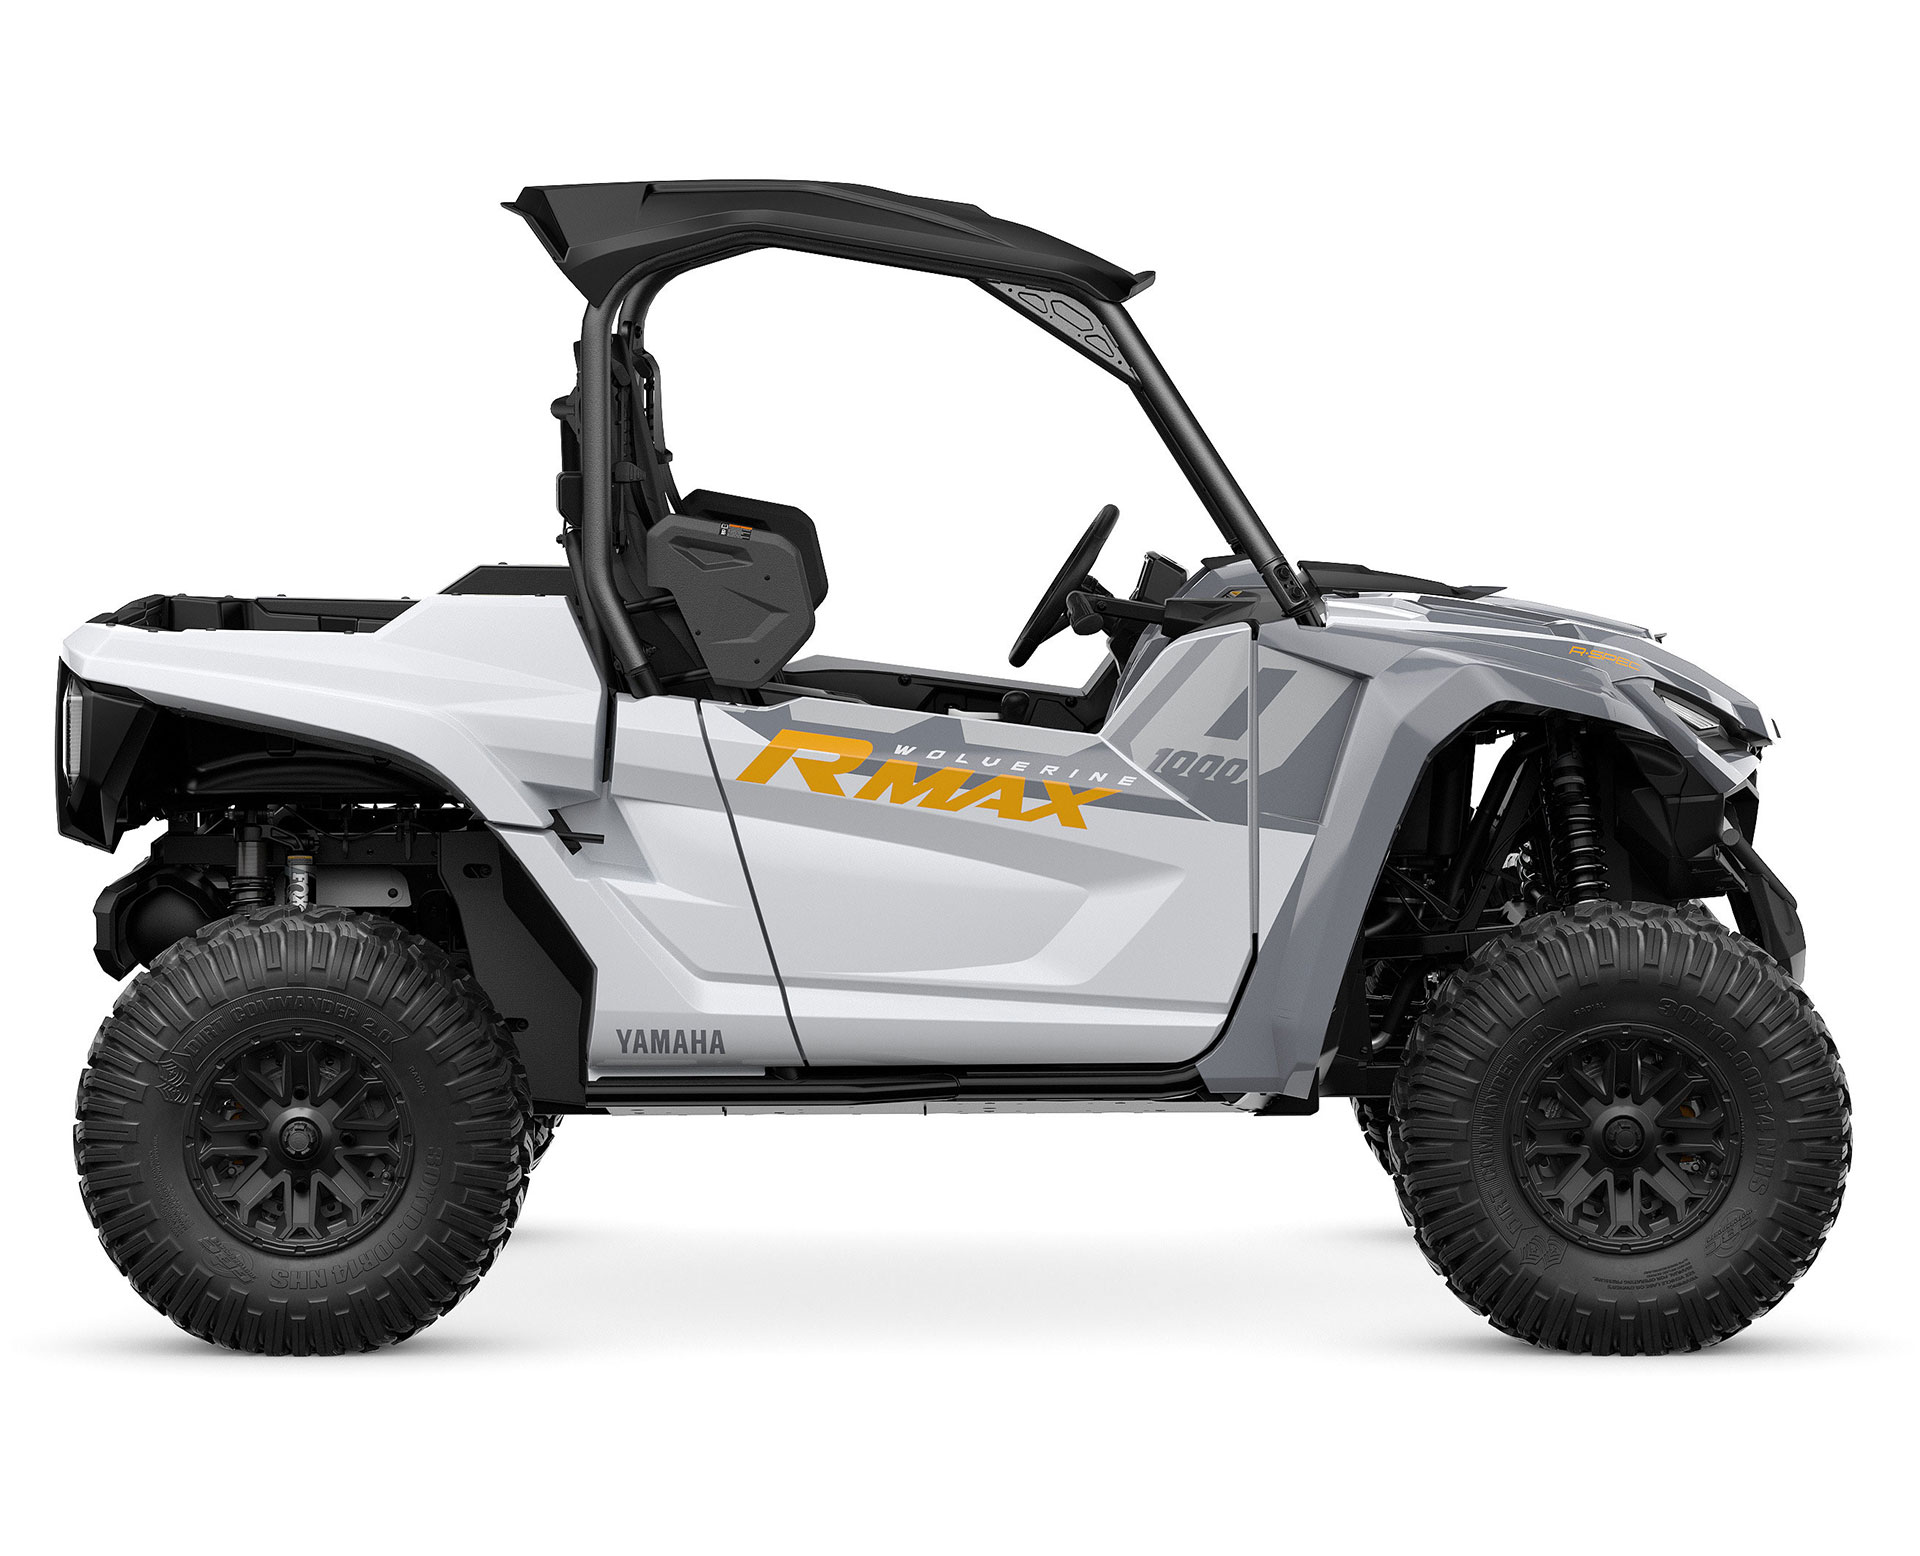 Thumbnail of your customized 2024 WOLVERINE® RMAX2™ 1000 R-Spec